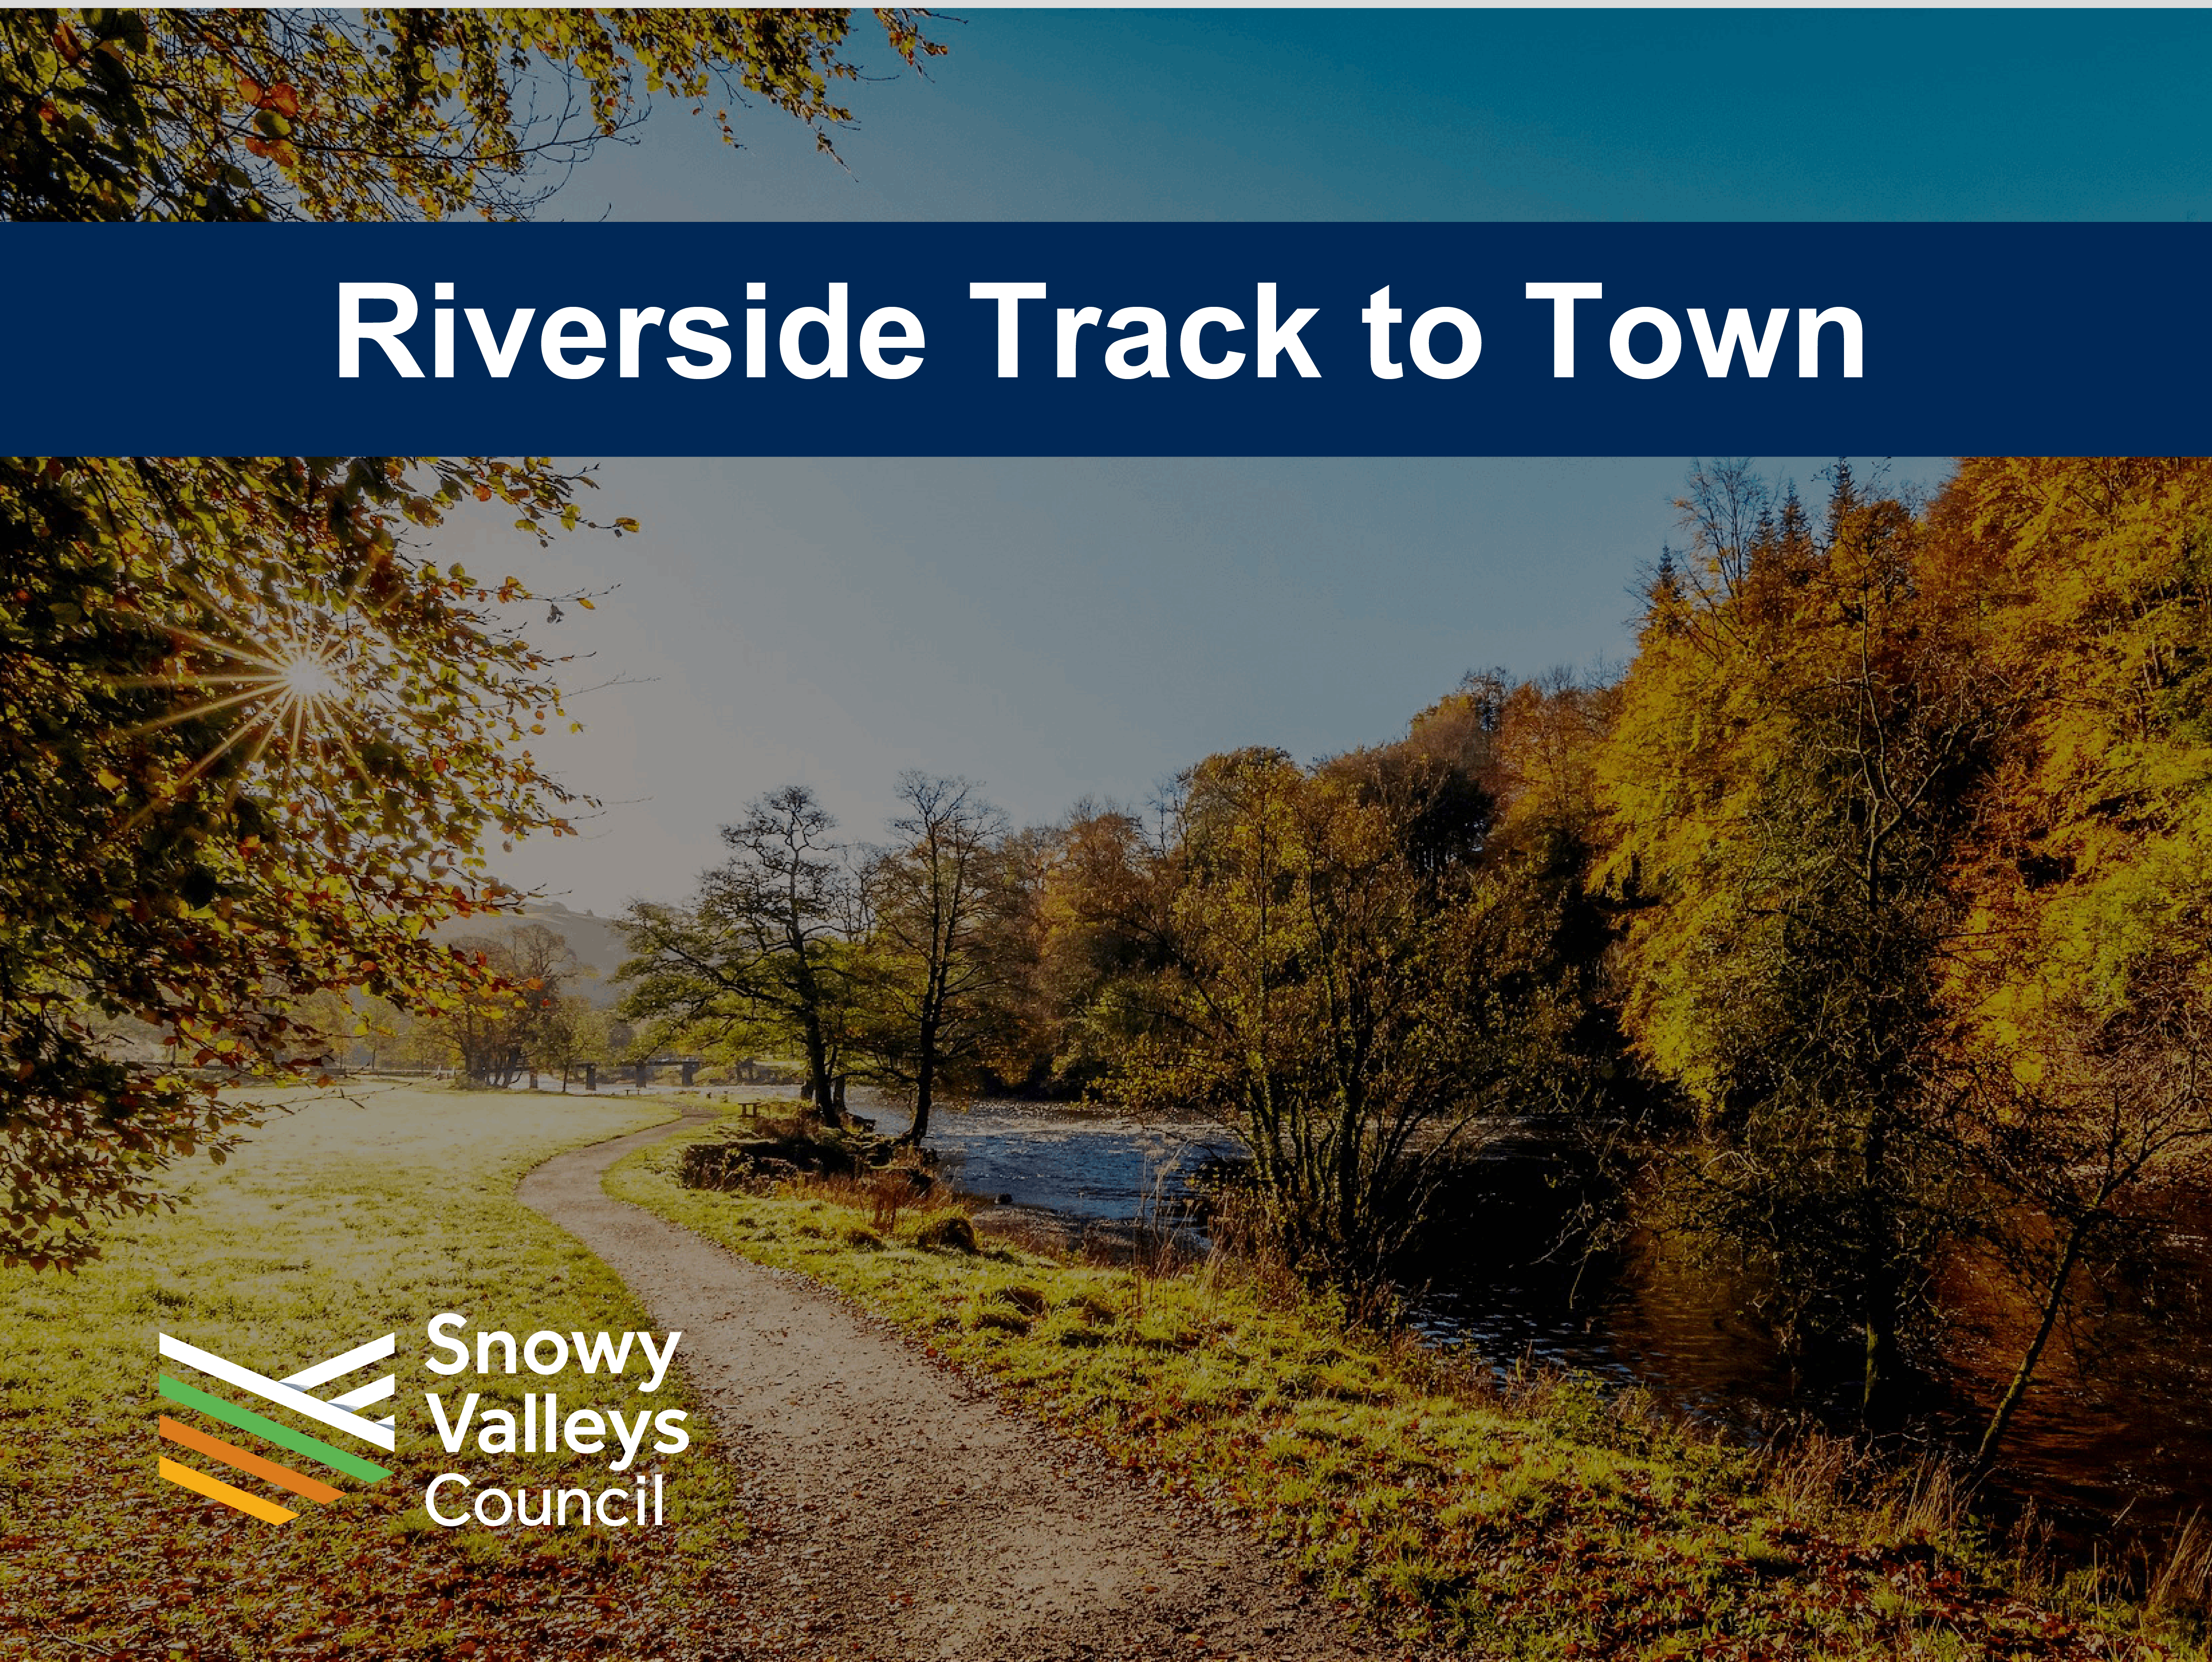 Riverside track to town